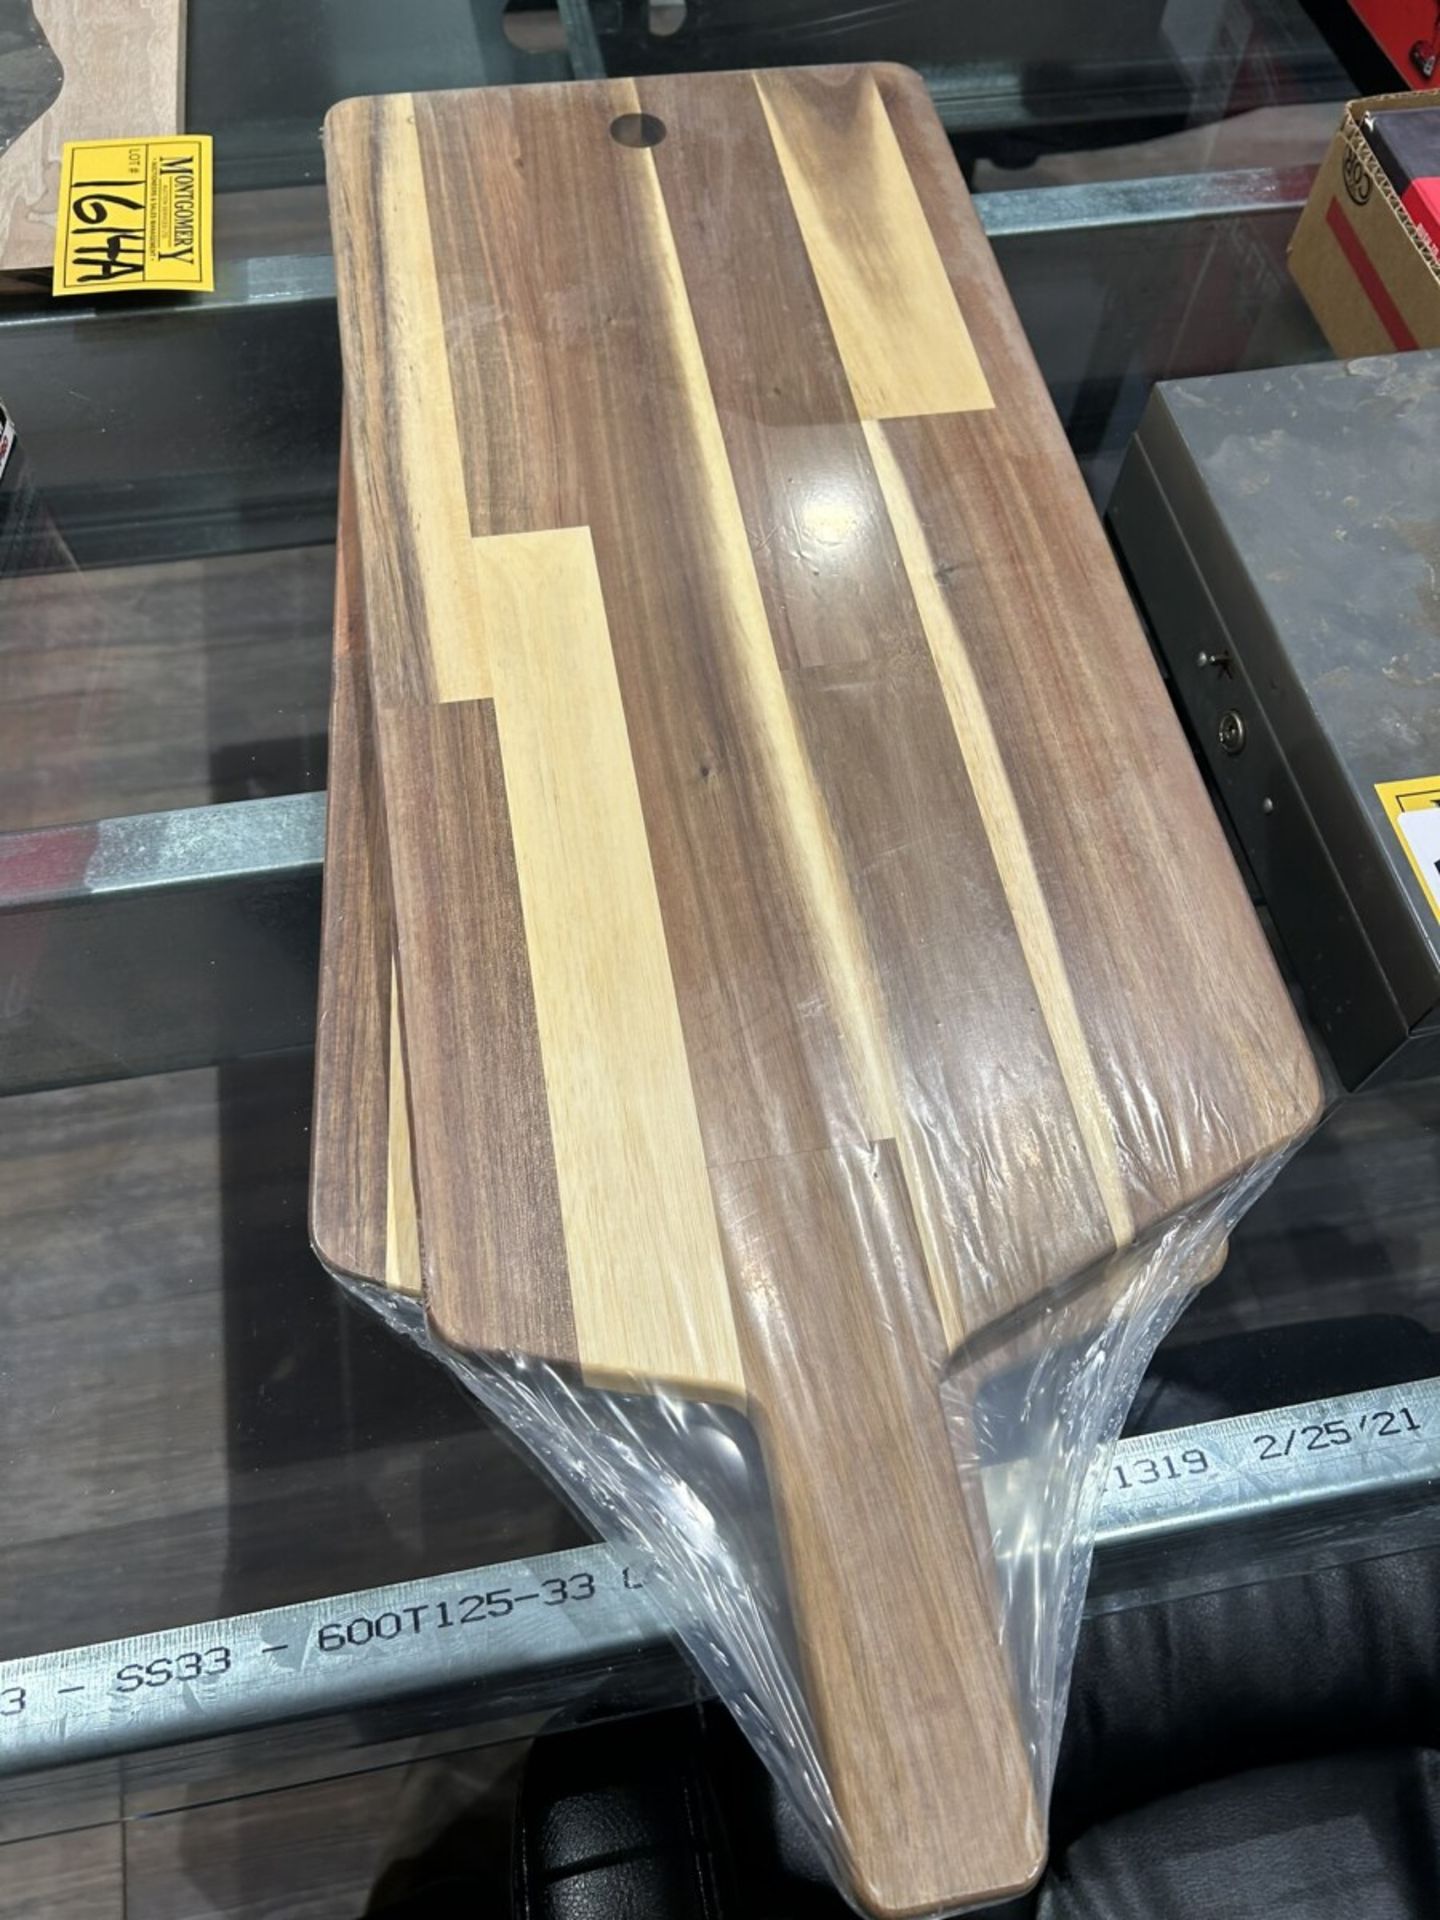 L/O OF HARDWOOD CUTTING BOARDS (NEW IN PACKAGE) - Image 5 of 5